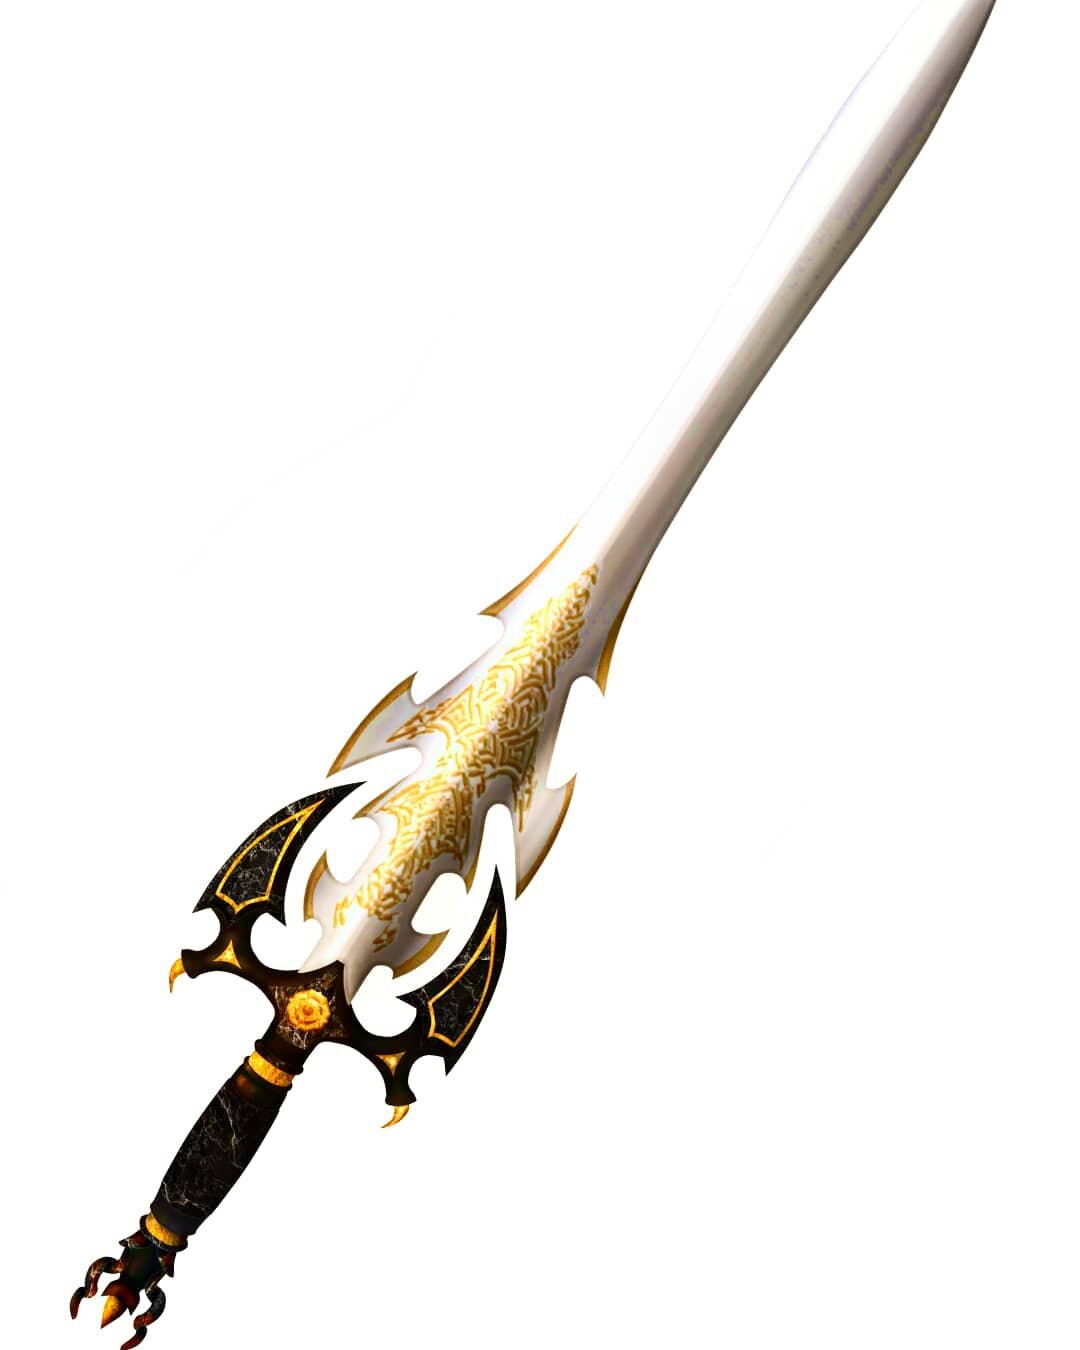 Excalibur is a famous blade in my book series. It's named after the Arthurian legend and in my universe, Skye wields it. The sword was passed down from her mother. As you can see, there is a circular symbol on the hilt which belongs to the Farien Blo